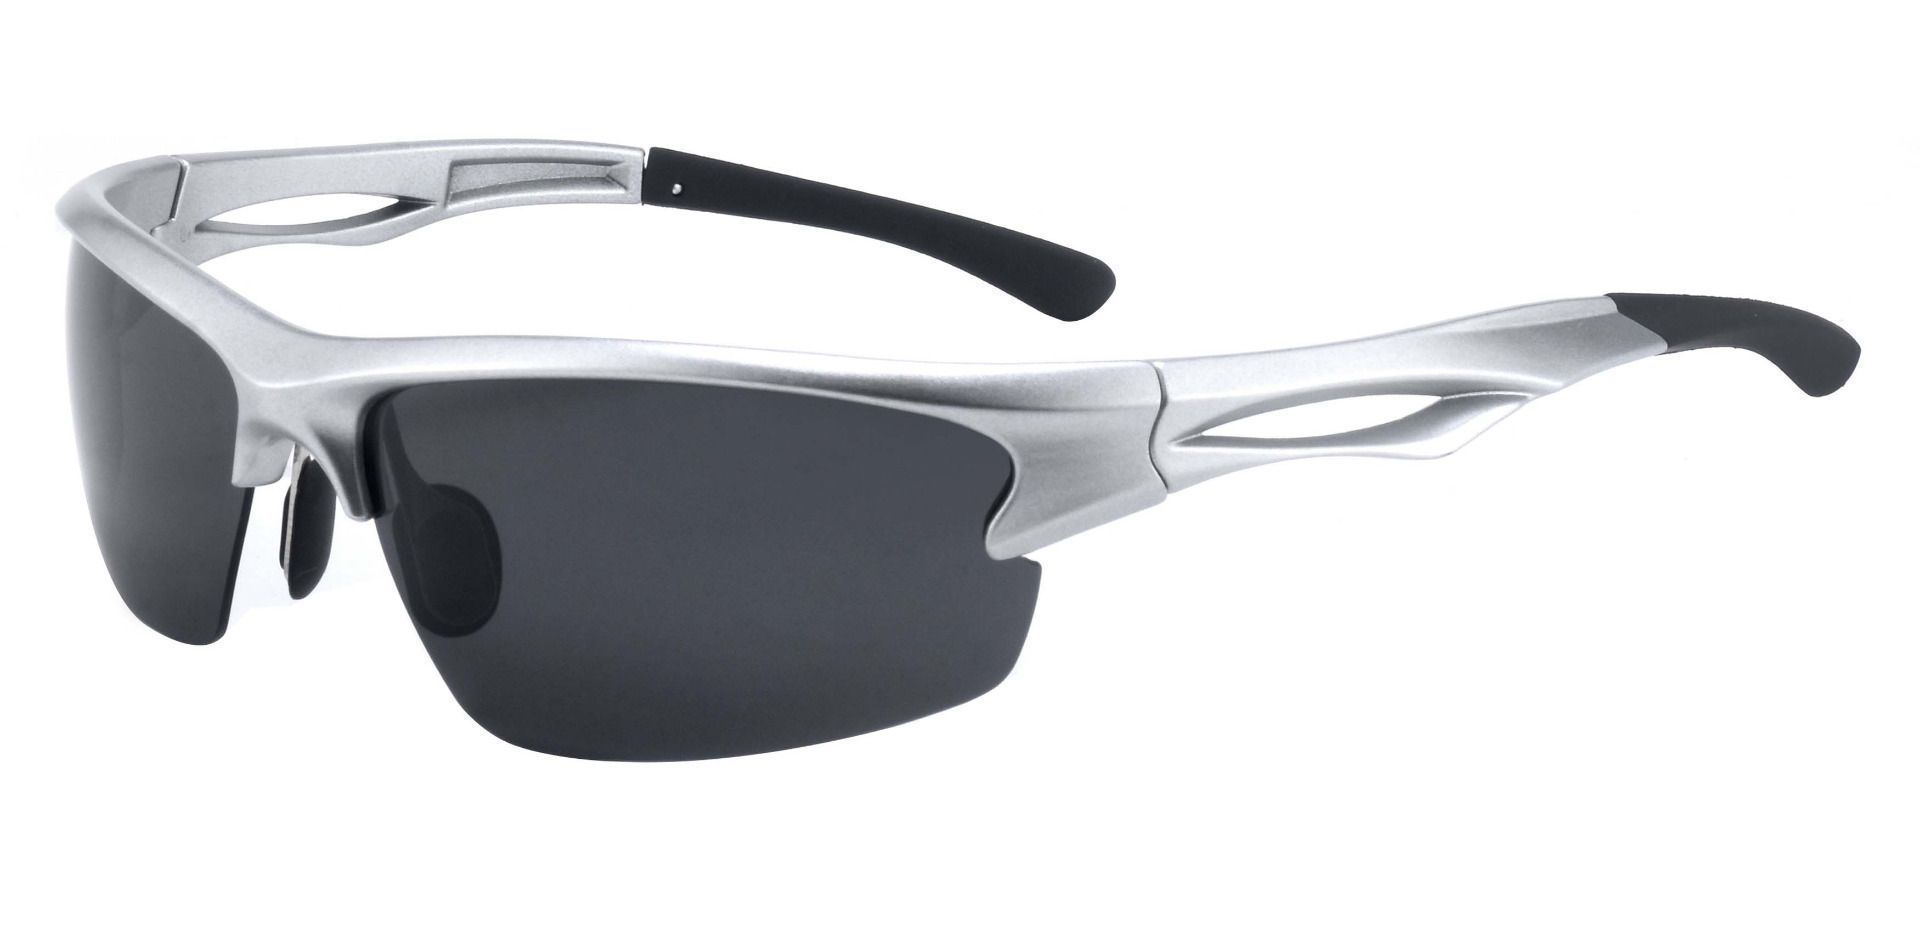 League Sports Glasses Non-Rx Sunglasses - Silver Frame with Grey Polarized Lenses